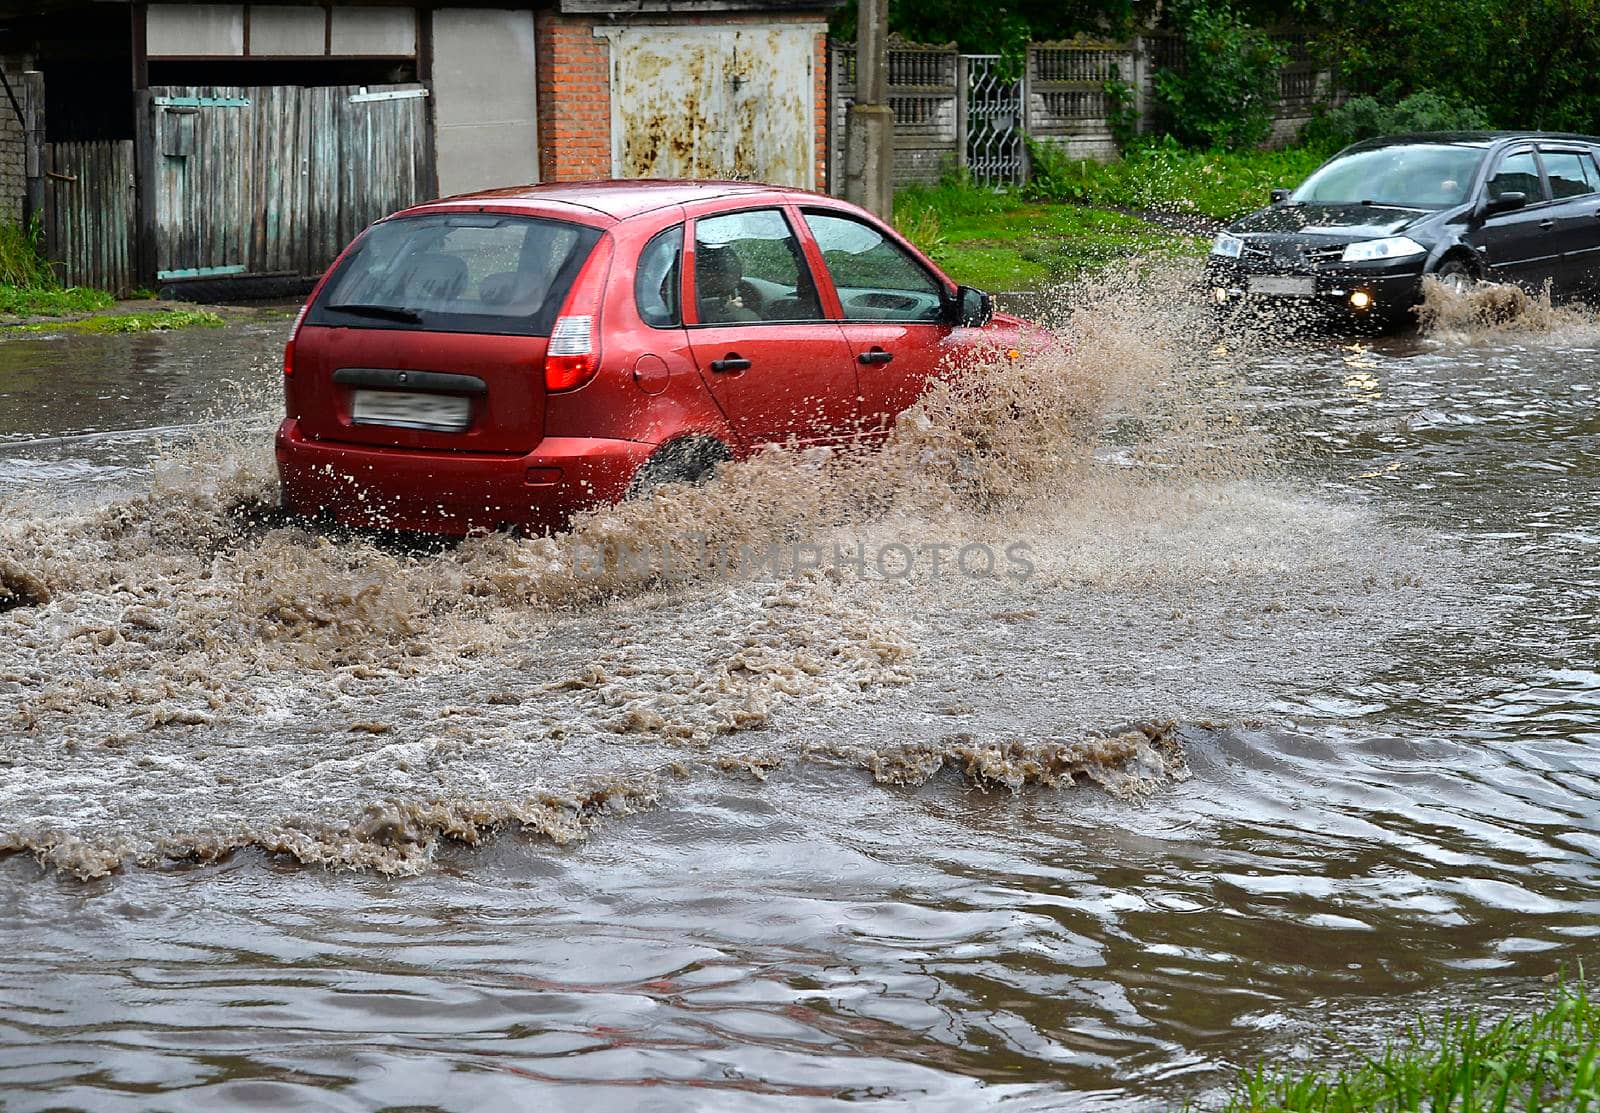 Cars drive in pouring rain on a flood-flooded road.